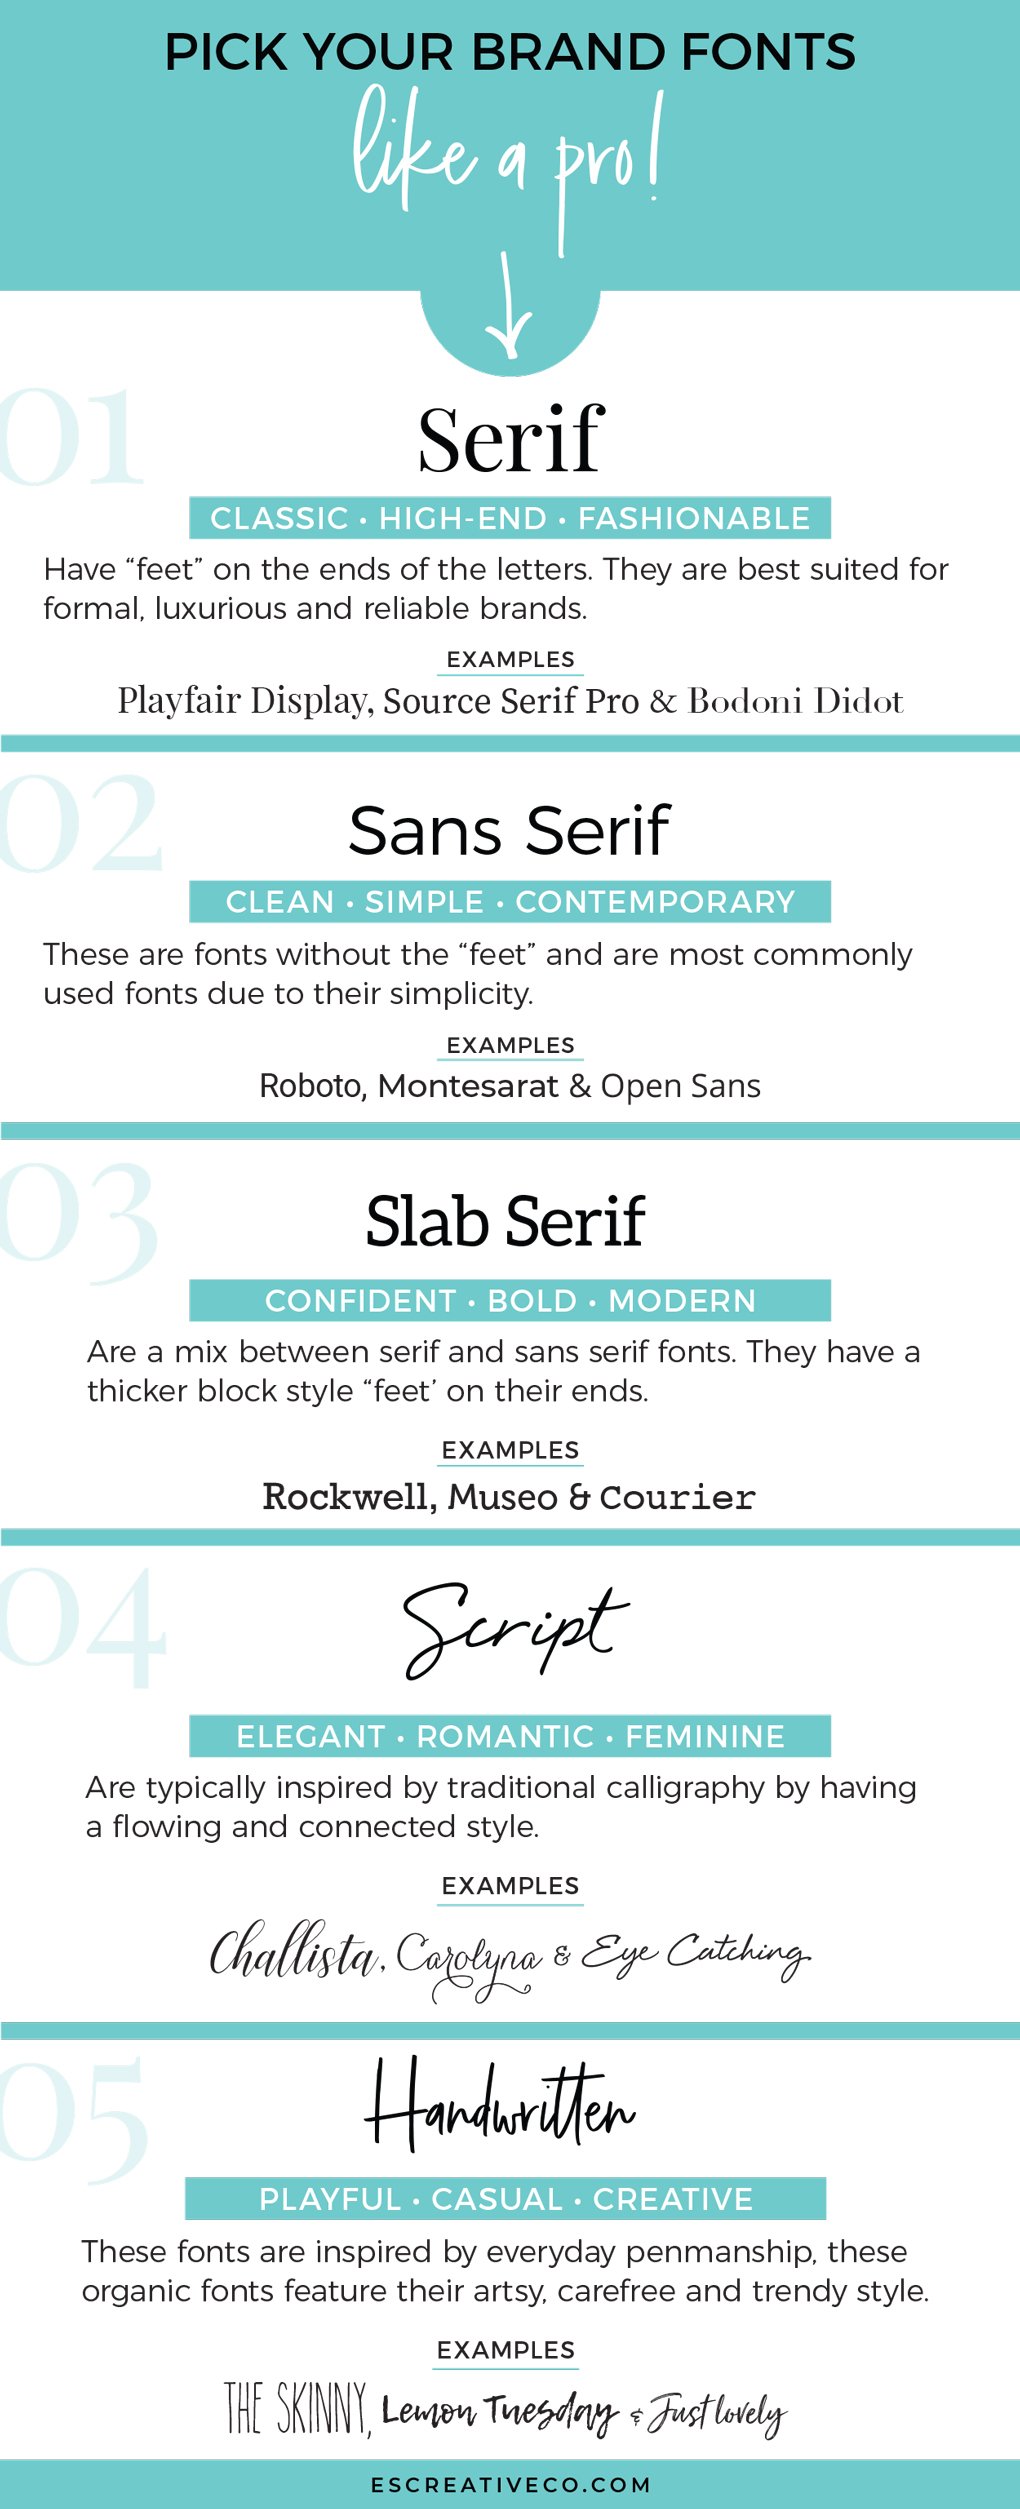 How to pick your fonts like a pro!